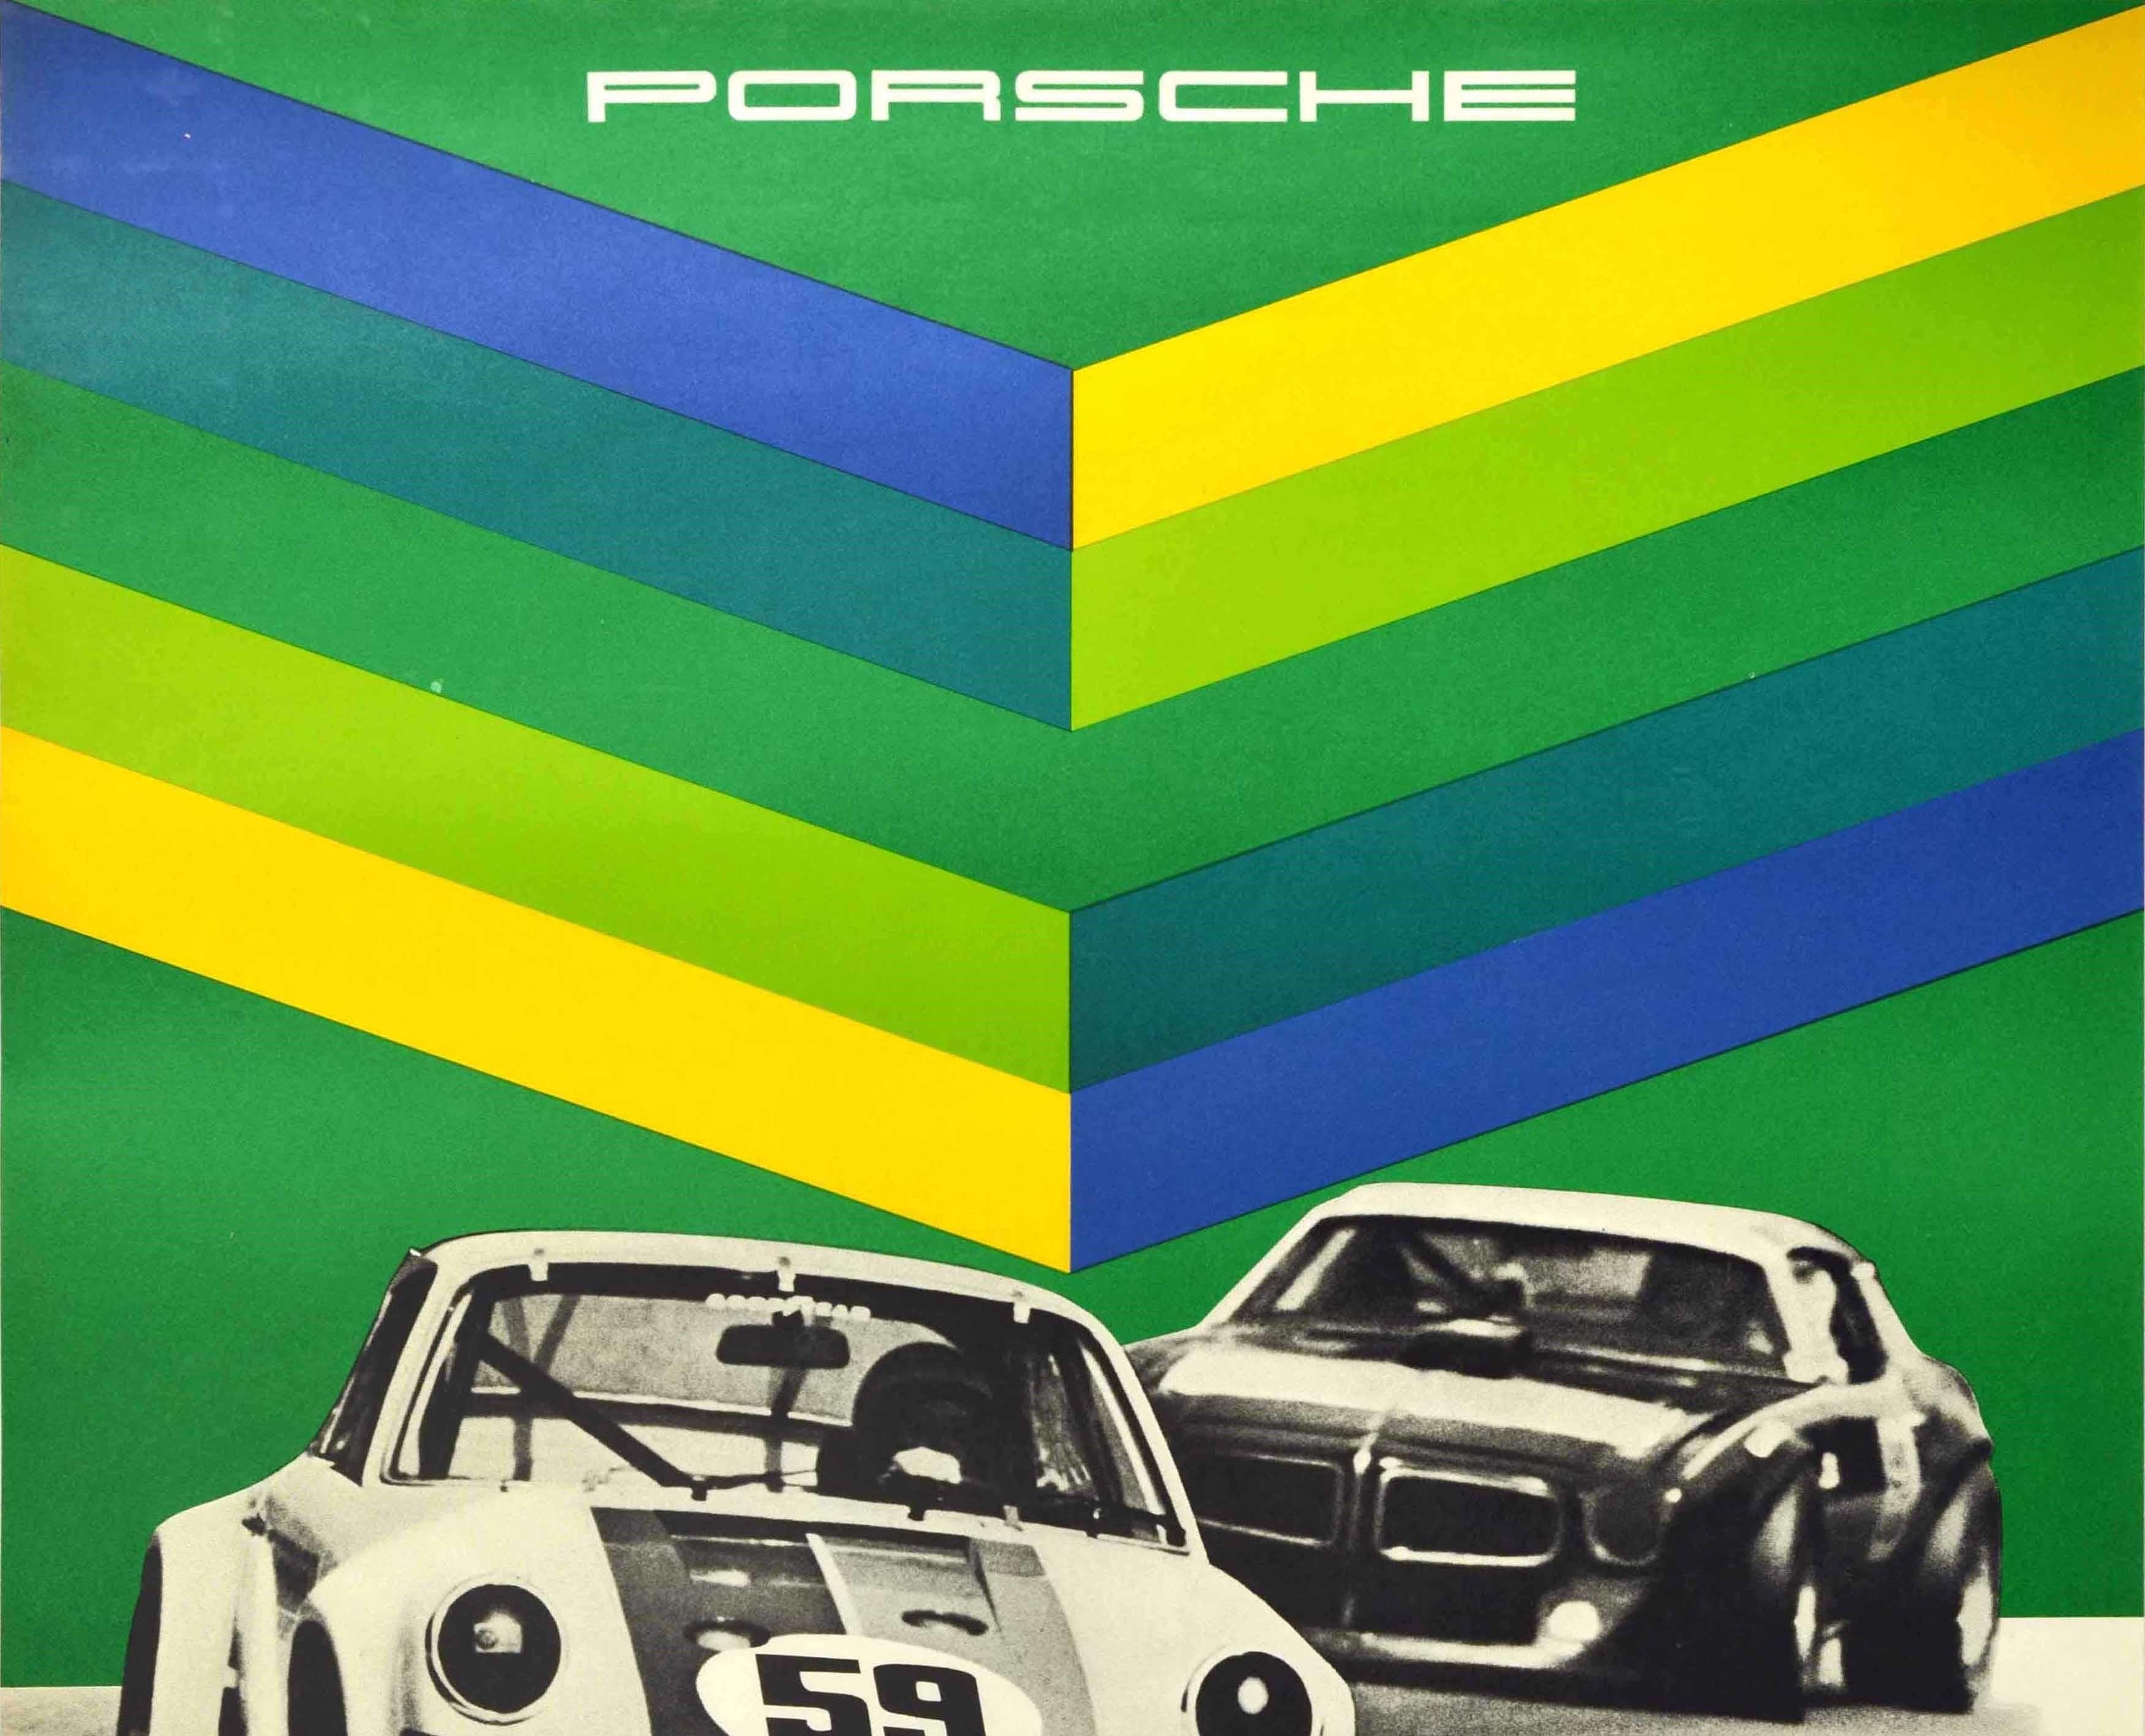 Original vintage motorsports poster celebrating Porsche's victory at the 1973 Trans-Am featuring a bold design showing a black and white photo of a Porsche 911 Carrera RSR numbered 59 being driven by the American race car driver Peter Gregg